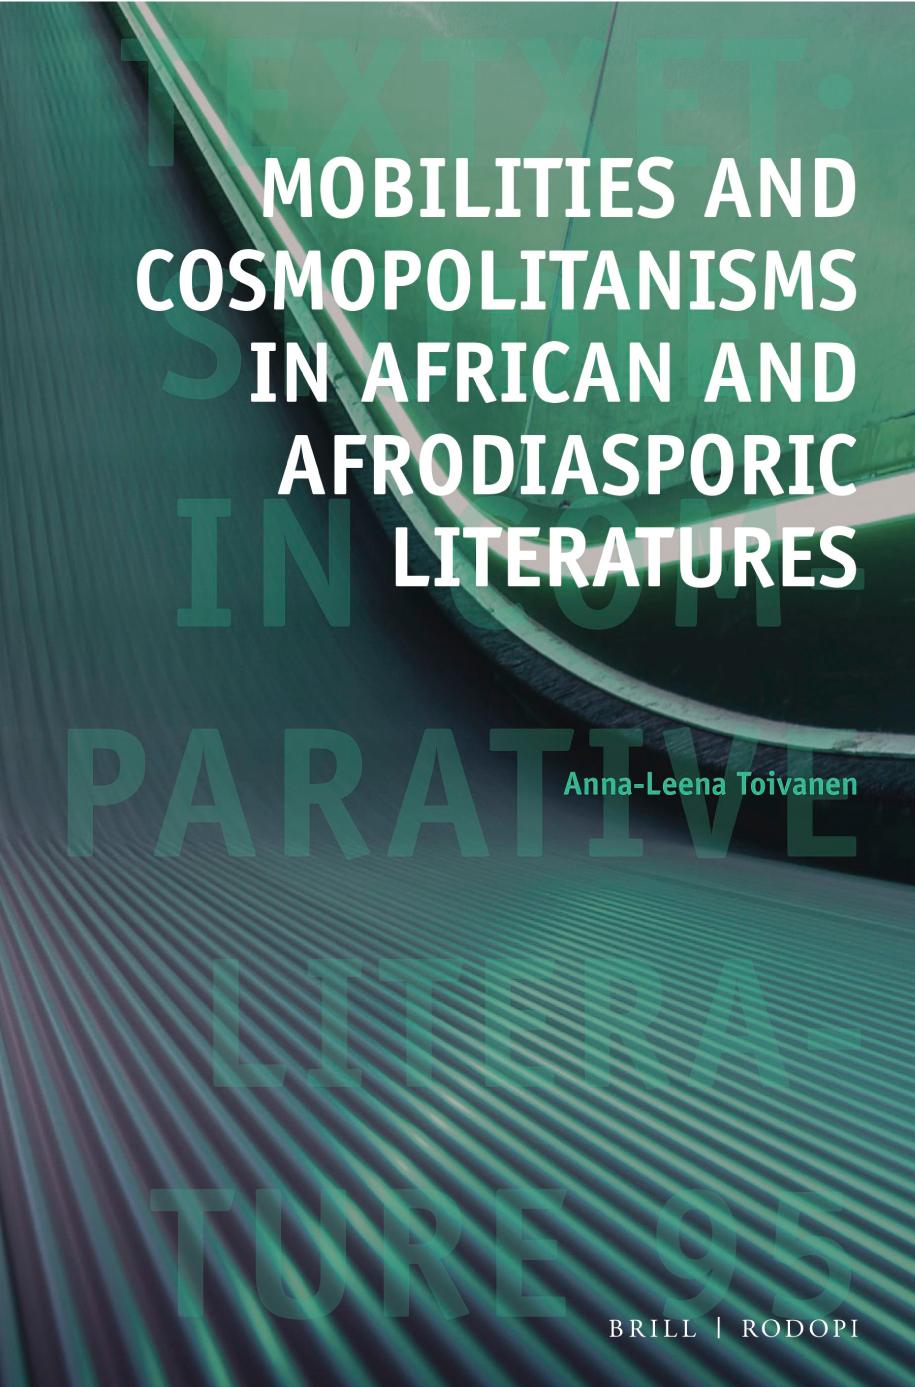 Mobilities and cosmopolitanisms in African and Afrodiasporic literatures